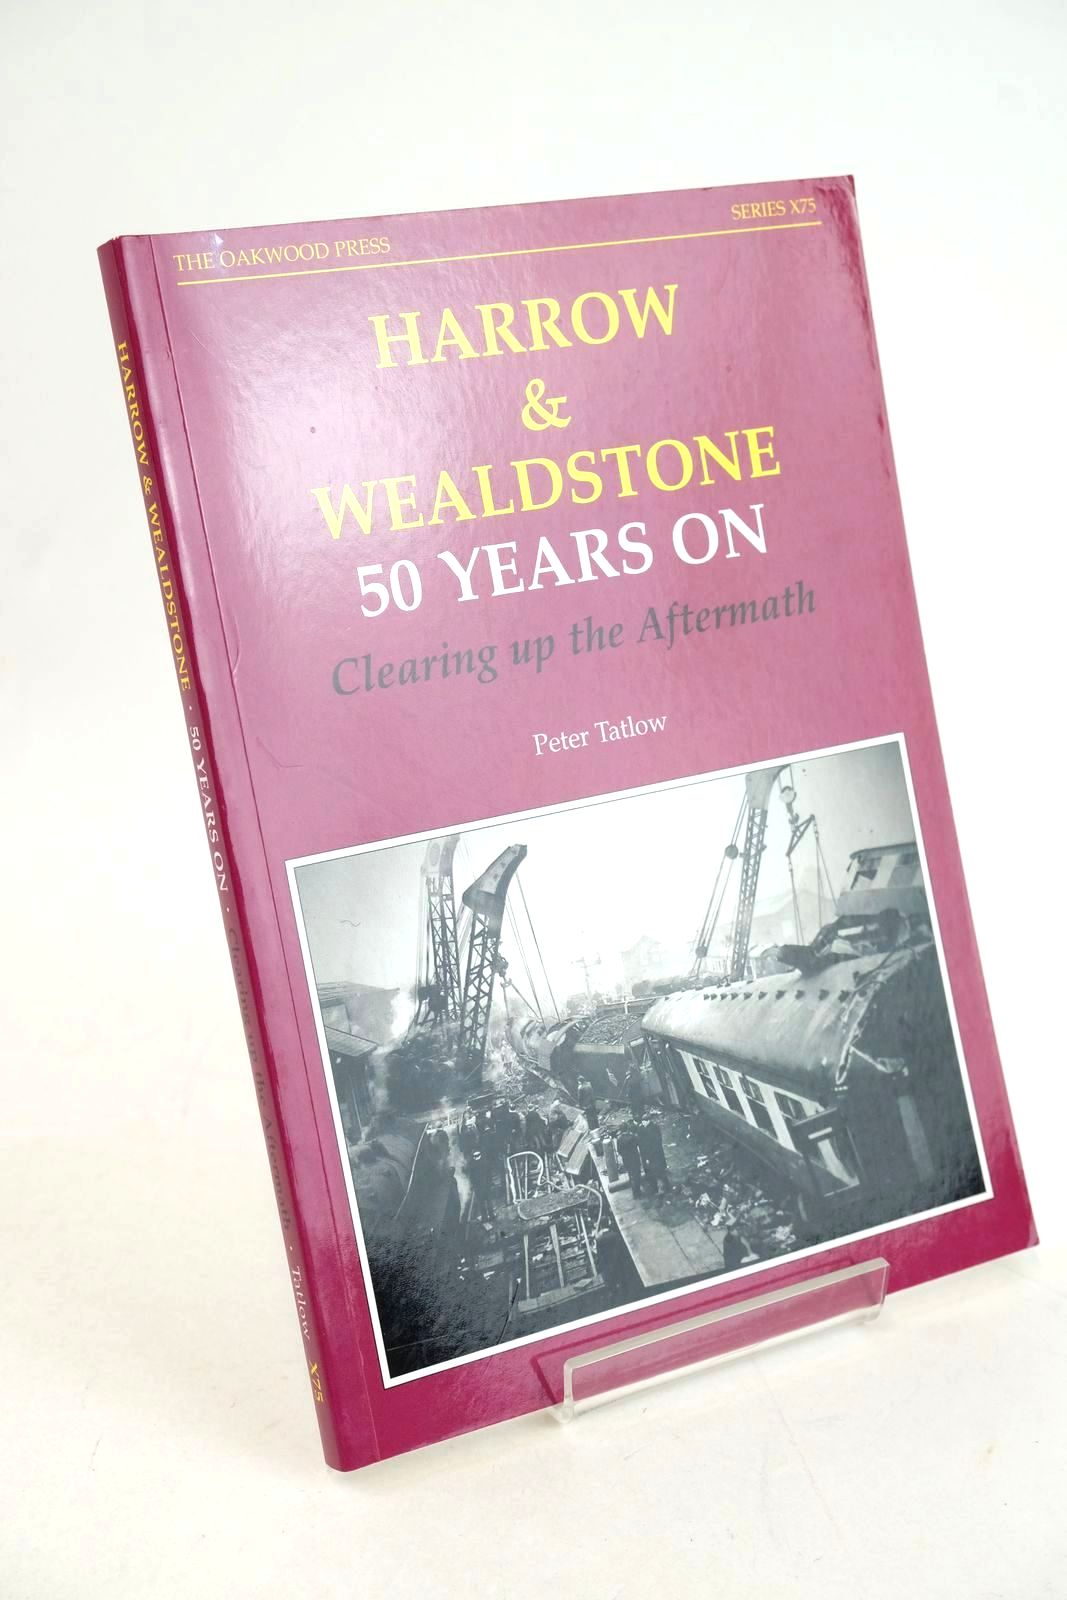 Photo of HARROW &AMP; WEALDSTONE 50 YEARS ON - CLEARING UP THE AFTERMATH written by Tatlow, Peter published by The Oakwood Press (STOCK CODE: 1327492)  for sale by Stella & Rose's Books